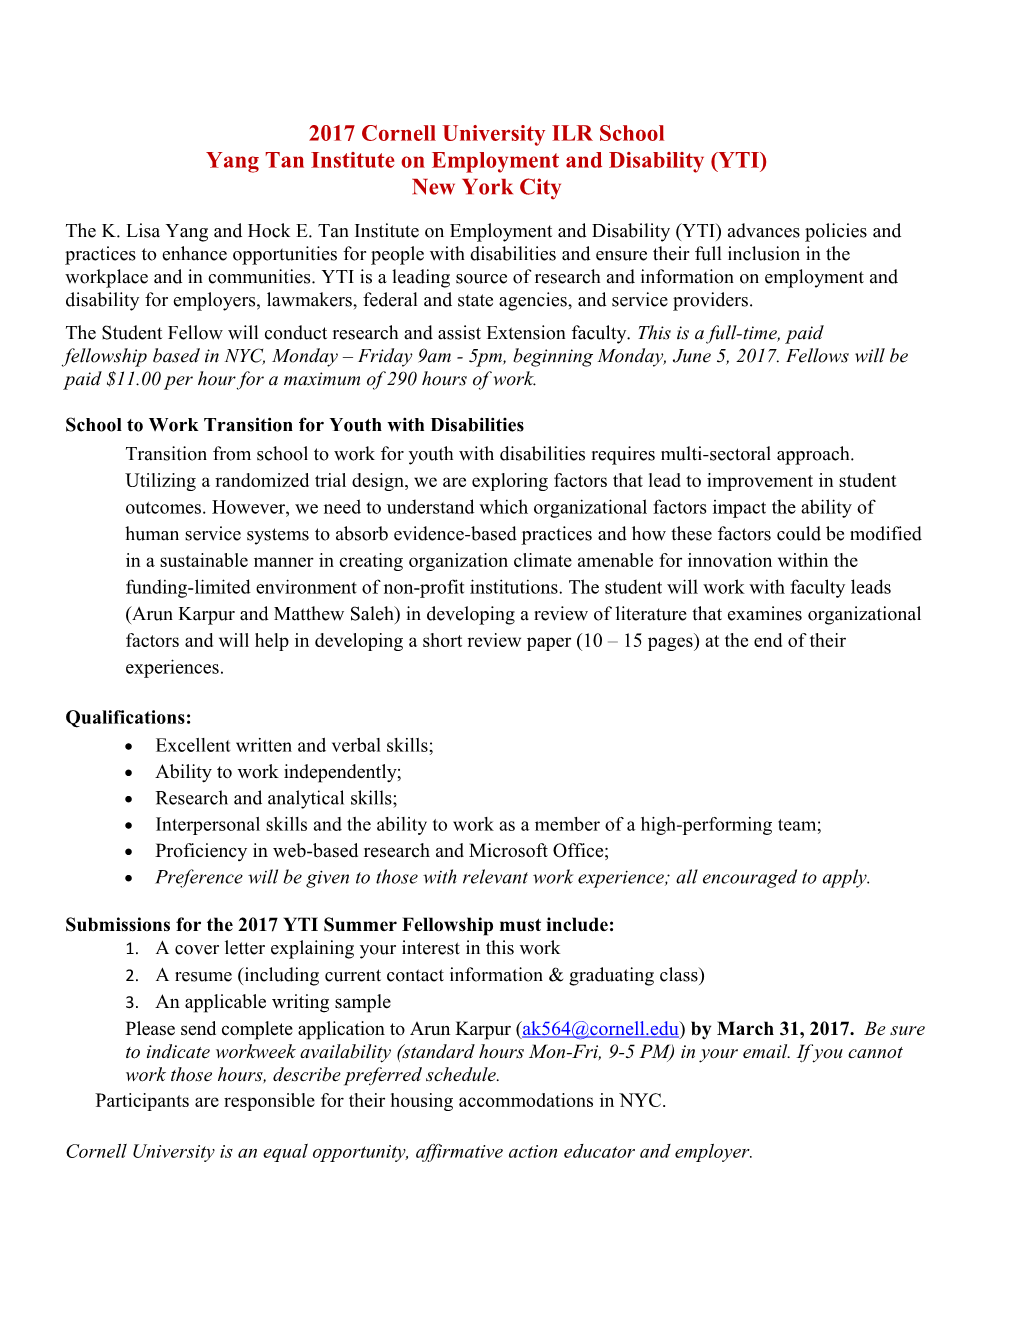 Yang Tan Institute on Employment and Disability (YTI)